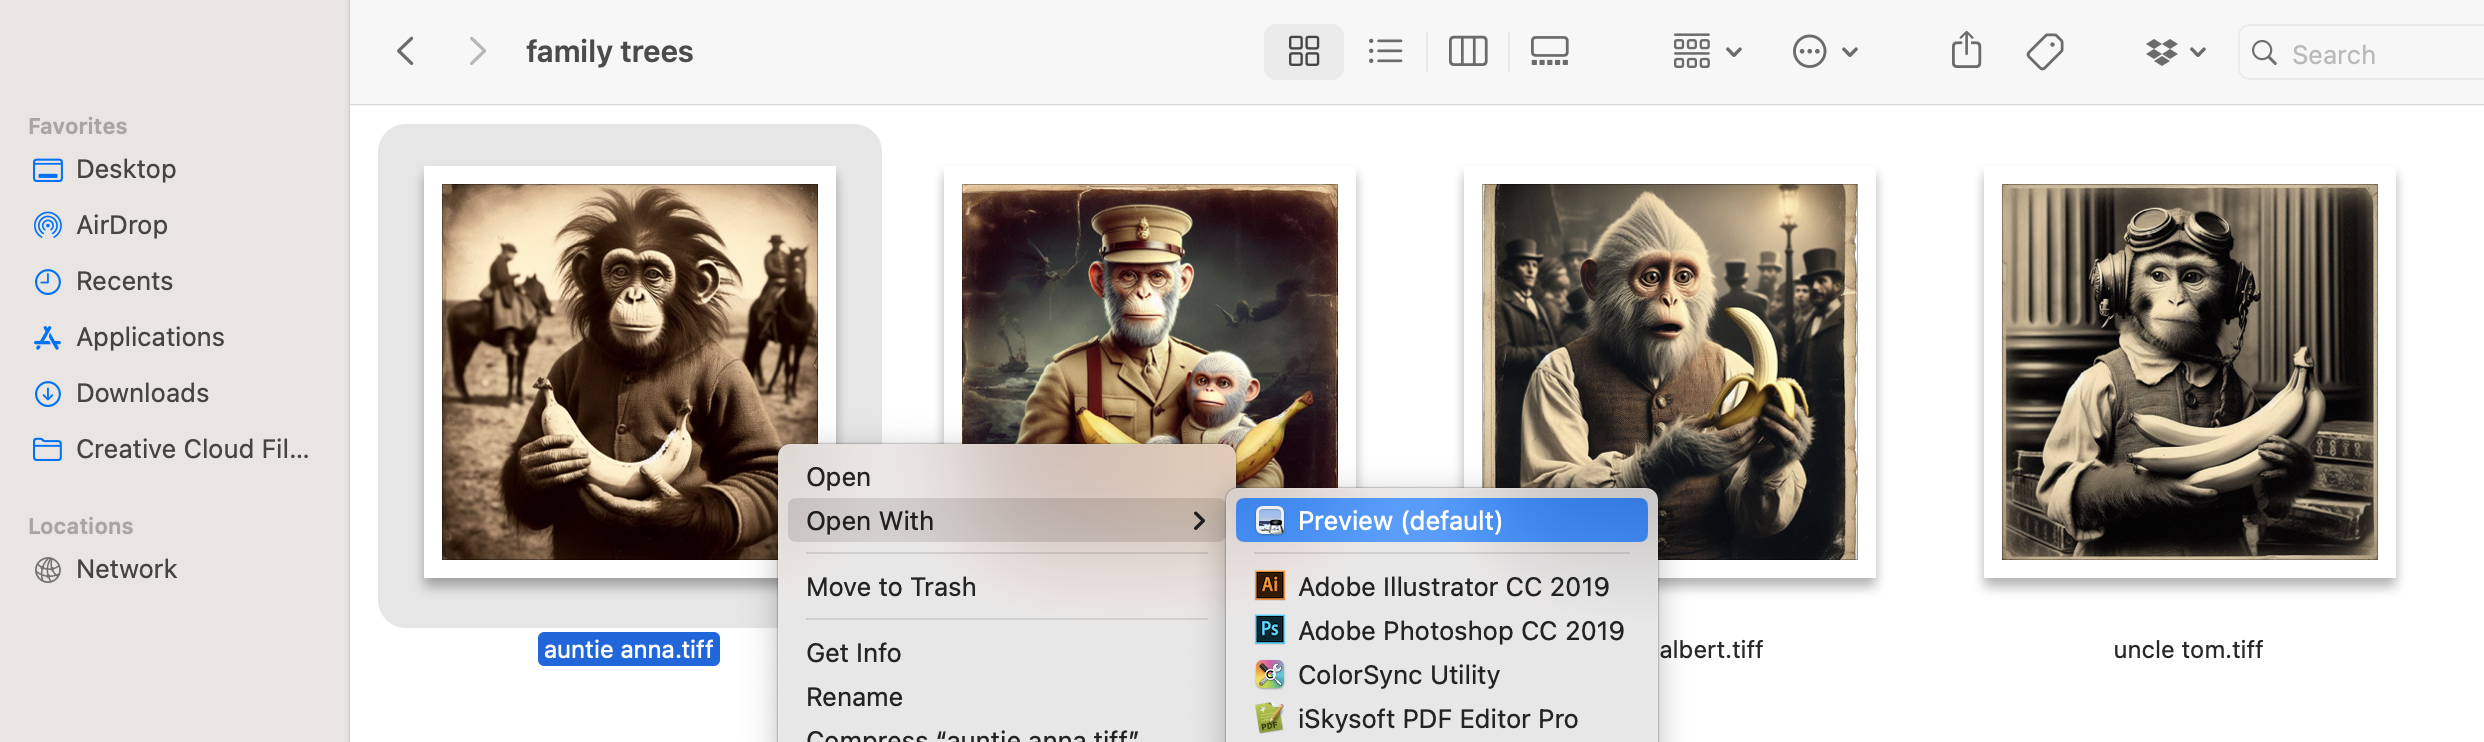 How to View Old Image Files on Mac Using Preview: Step 2